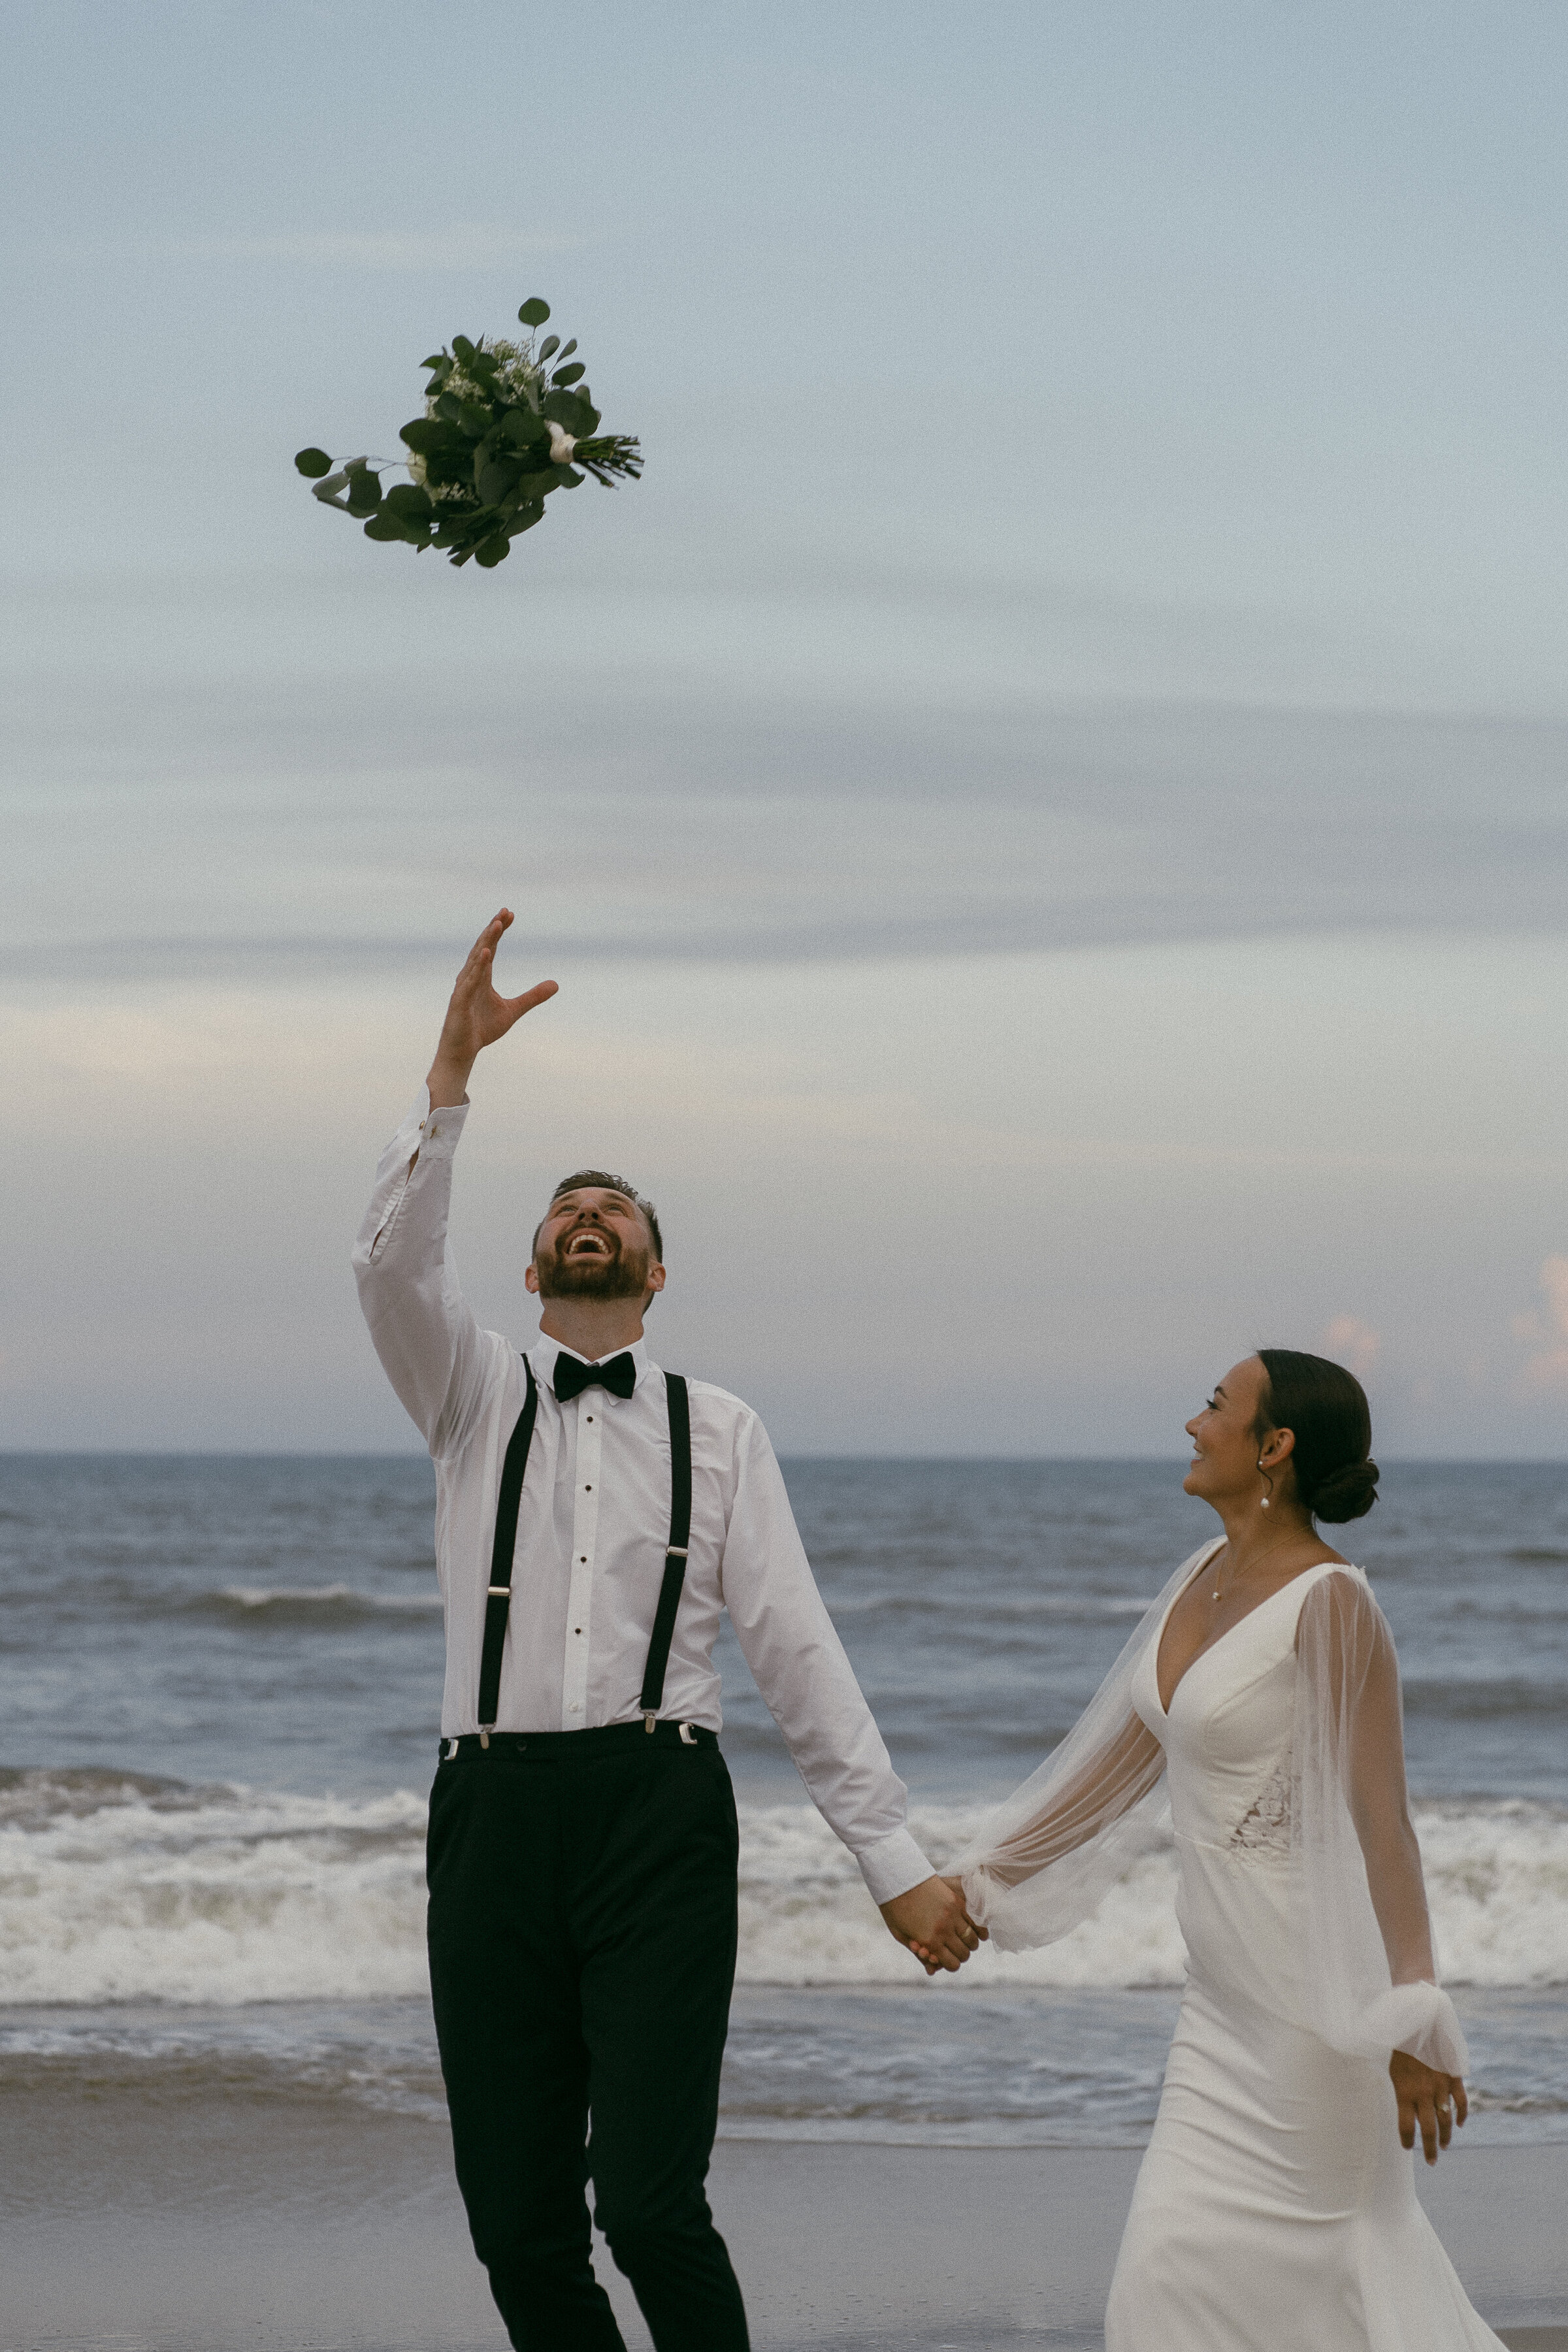 Bride and groom tossing a bouquet into the air on the beach.